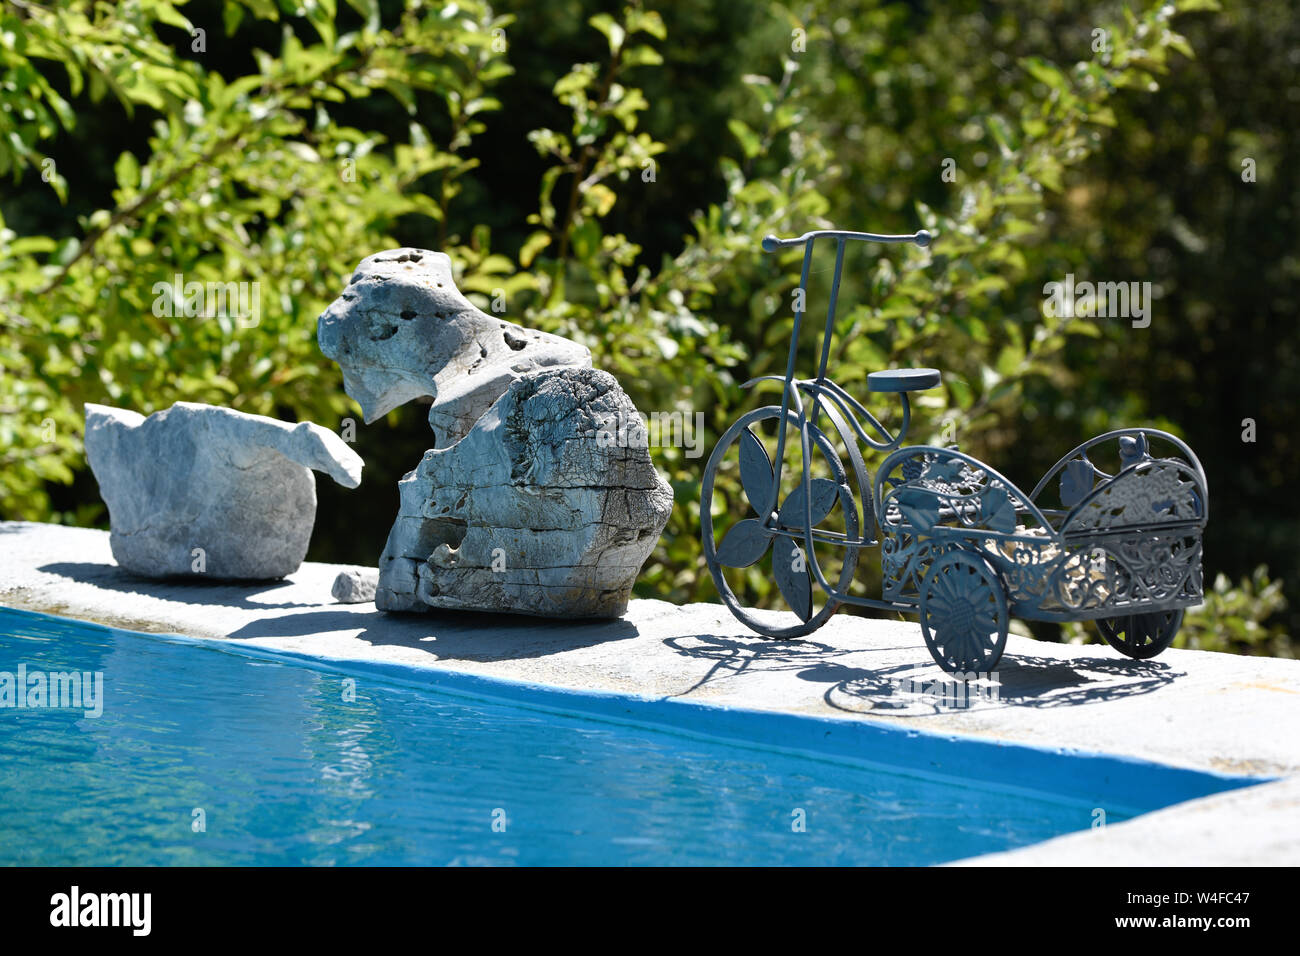 garden decoration with swimming pool Stock Photo